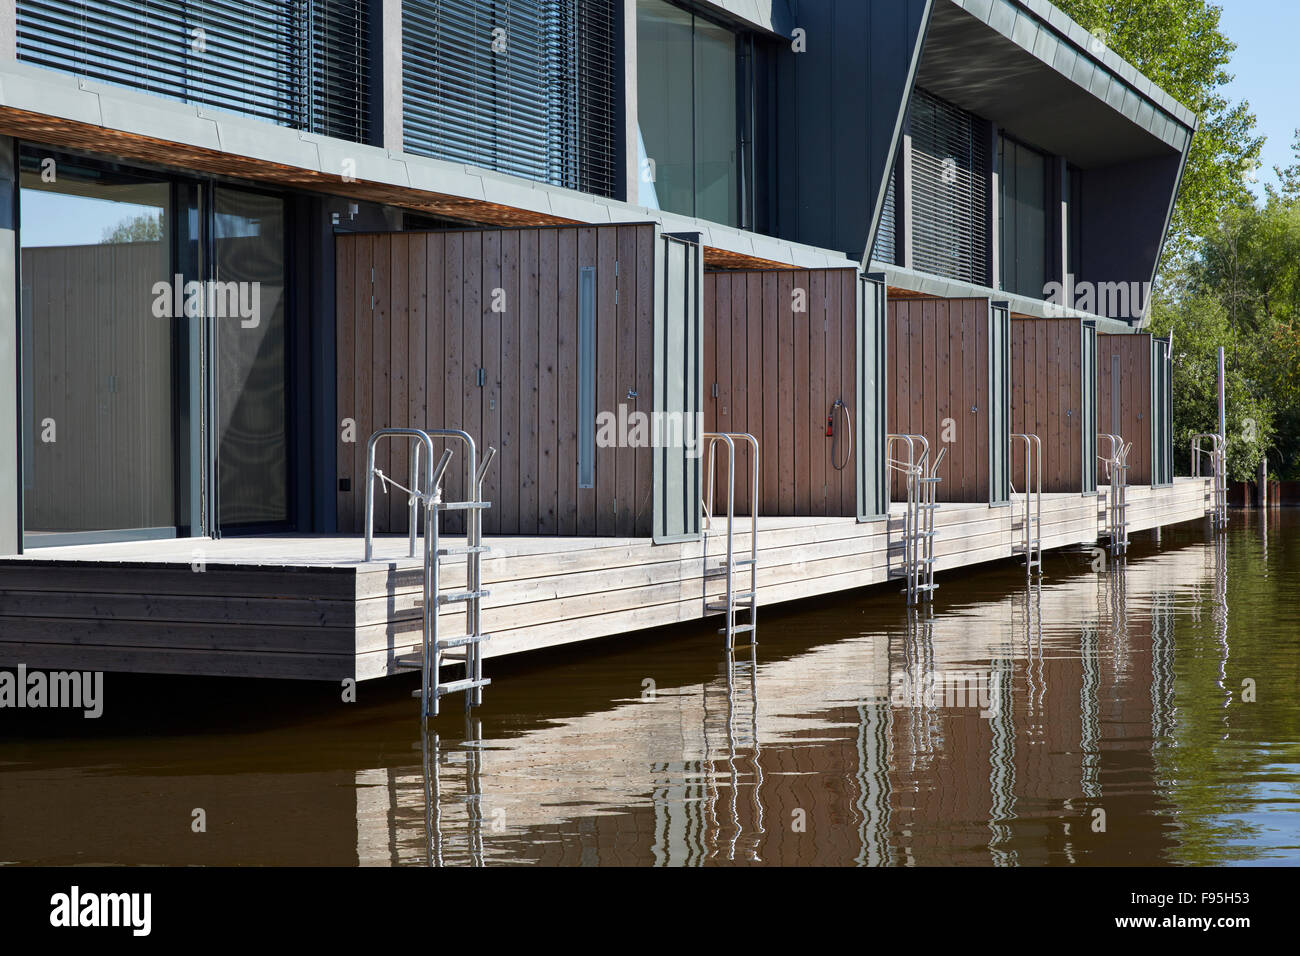 Housing development at Lake Neusiedl, Neusiedl am See, Burgenland, Austria. Exterior view of six terraced units with decking and ladder access to the lake at the contemporary waterside housing development at Neusiedl am See, Burgenland, Austria. Stock Photo